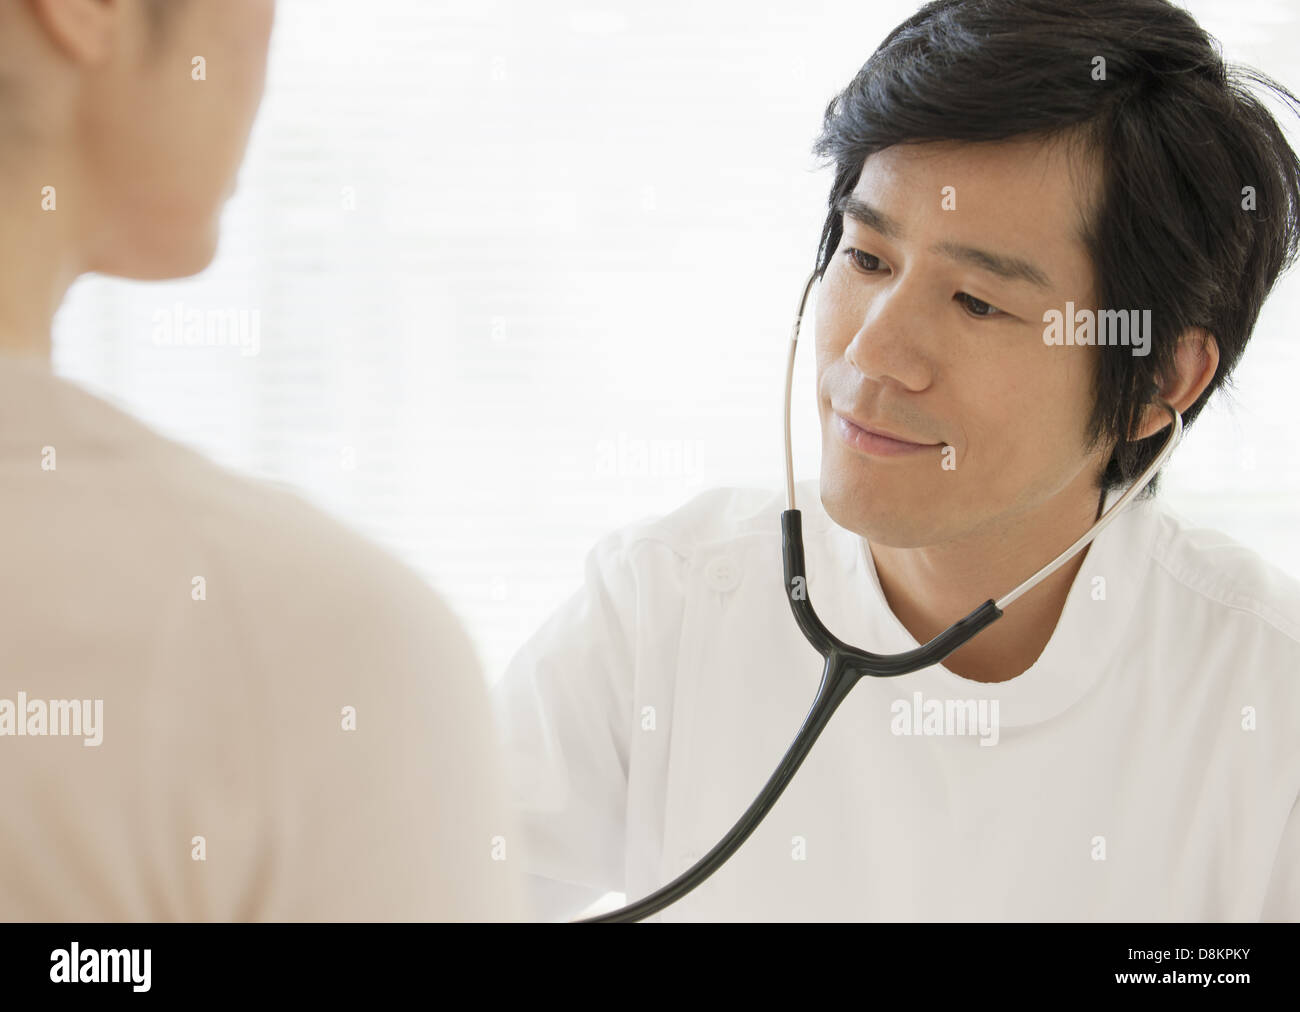 Doctor examining a patient Stock Photo